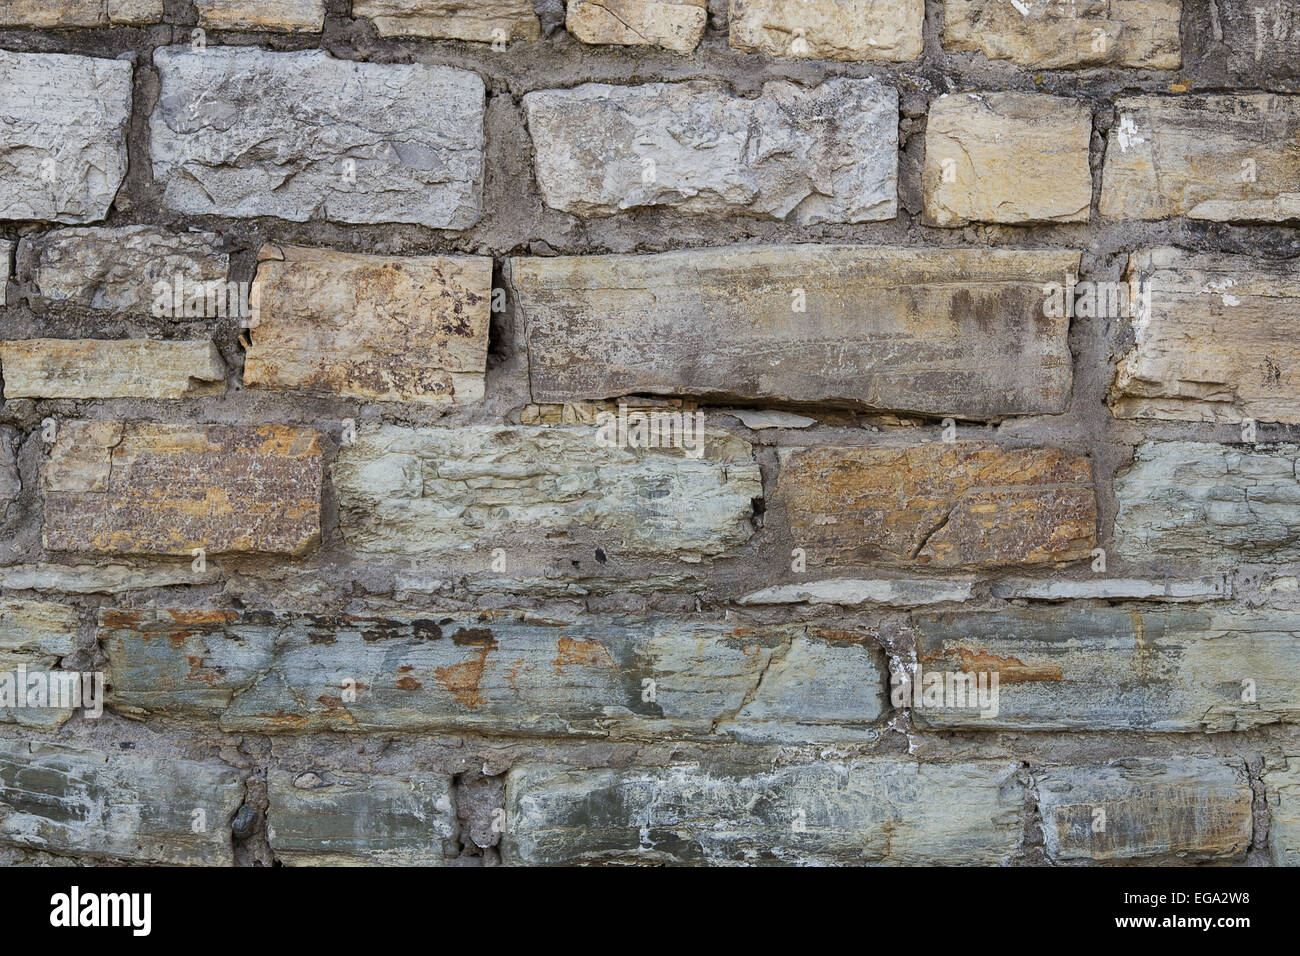 stone wall background medieval old Stock Photo